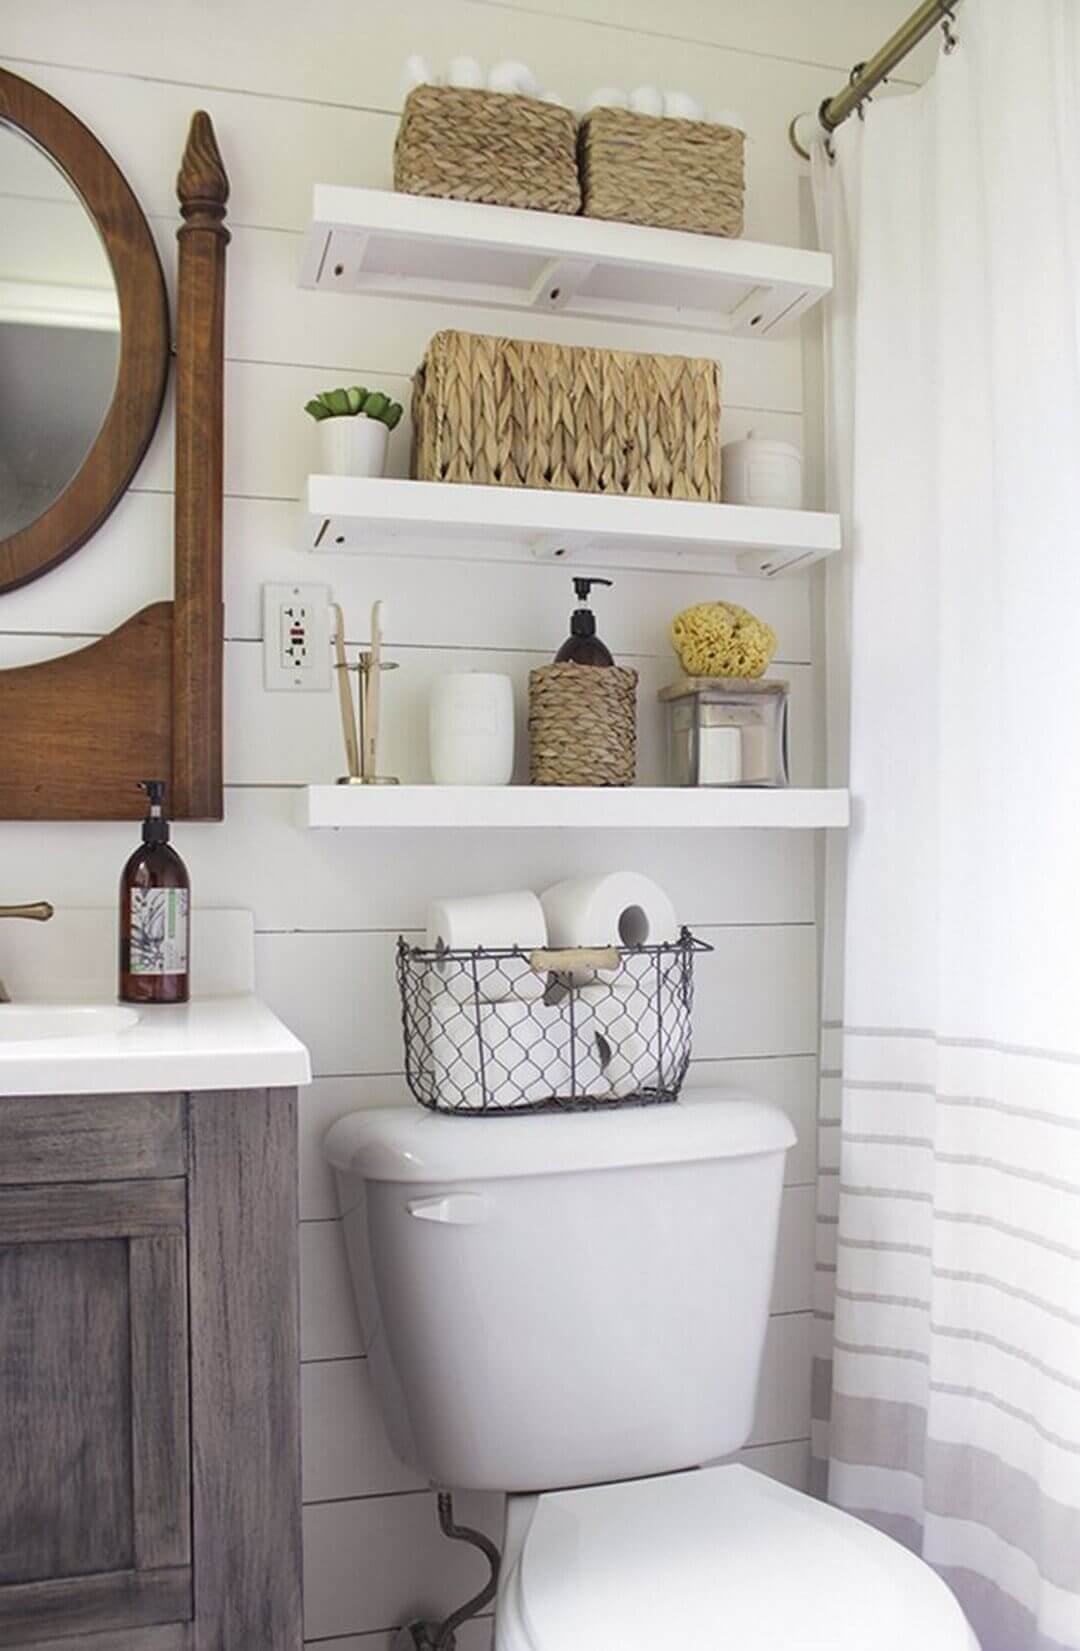 6 Easy Ways to Clear Out Bathroom Clutter This Weekend - Make the Most of Your Space